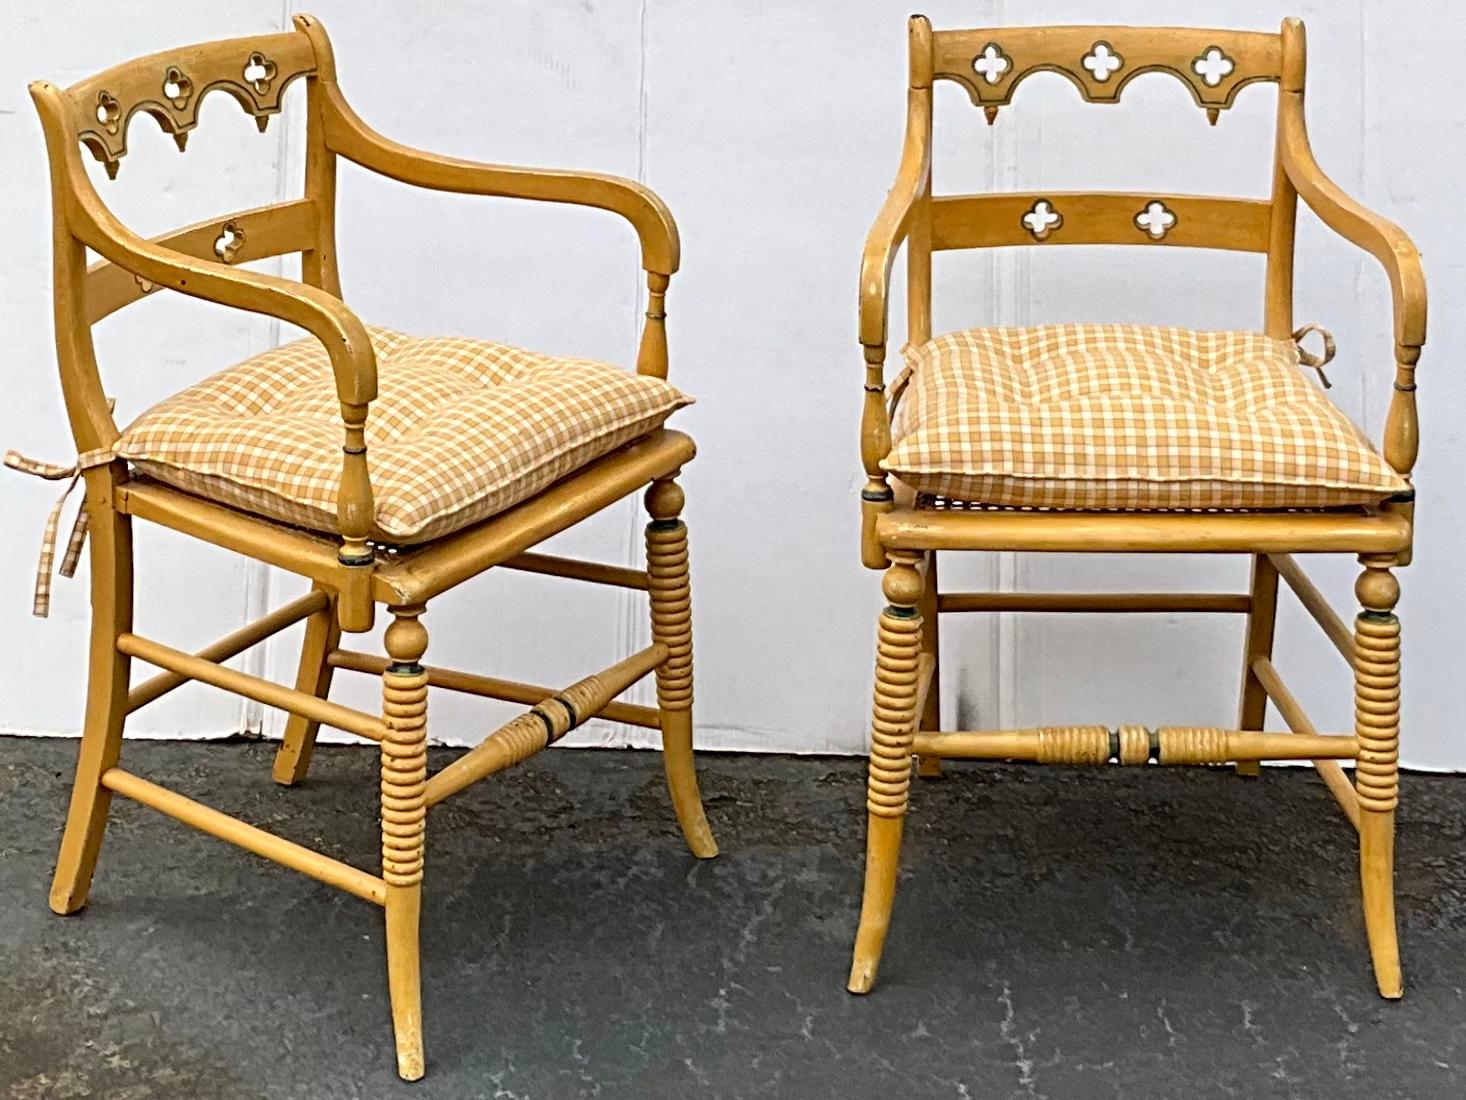 Upholstery Early 20th-C. English Regency Style Carved & Painted Cane Bergere Chairs - Pair